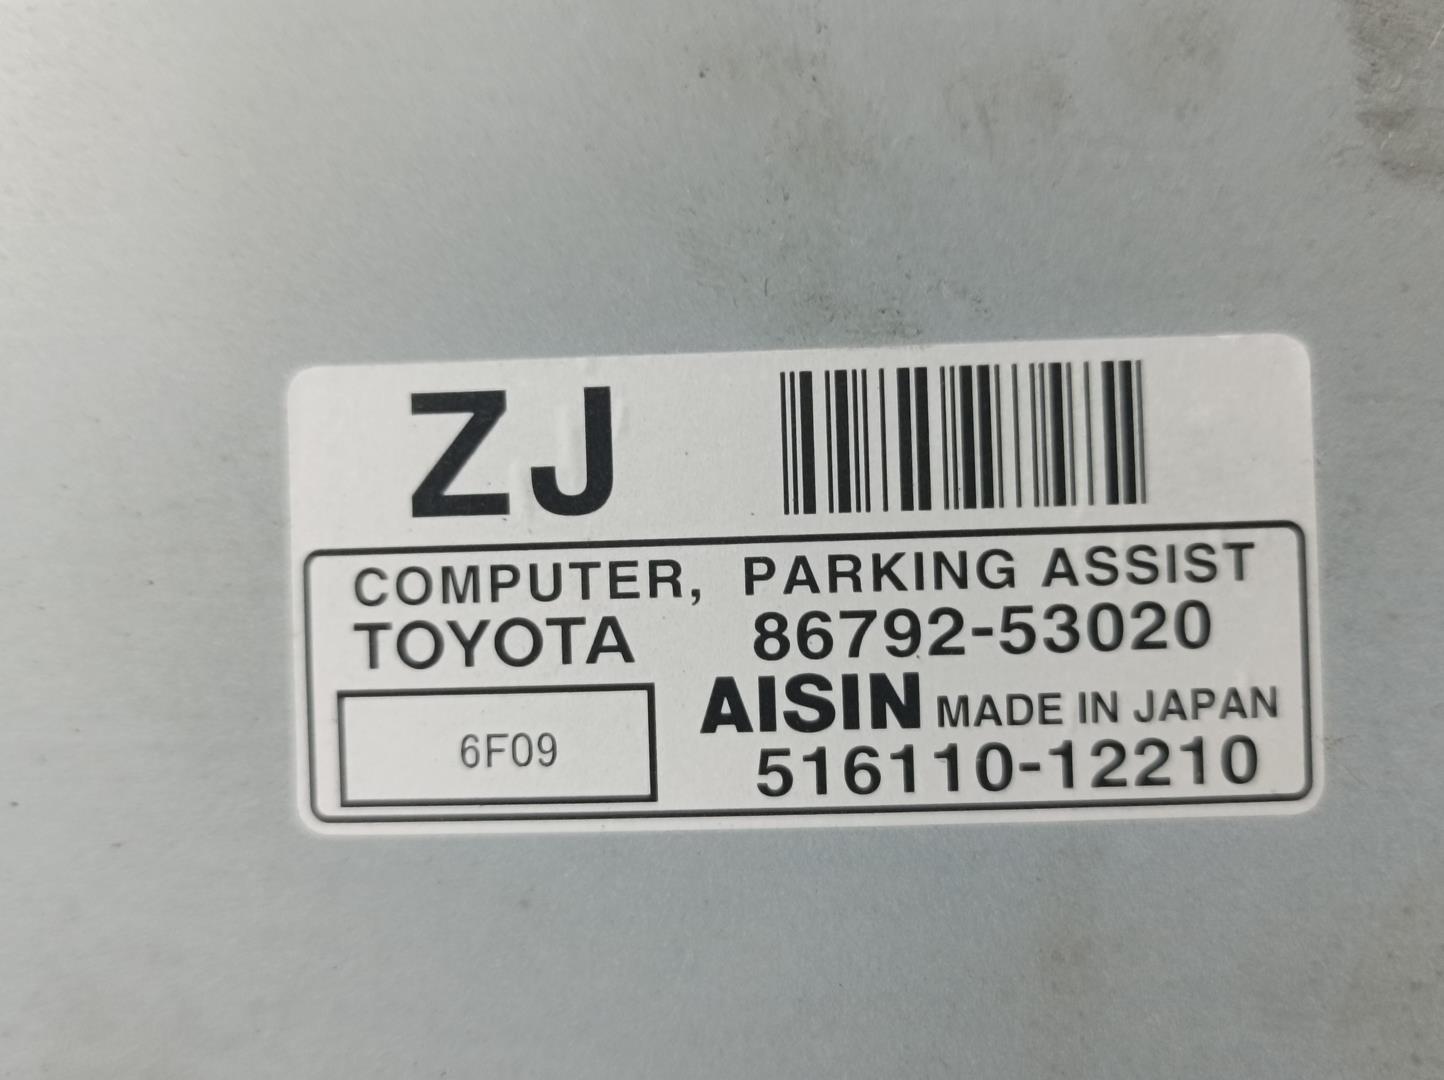 LEXUS IS XE20 (2005-2013) Other Control Units 8679253020, 51611012210, AISIN 23619911